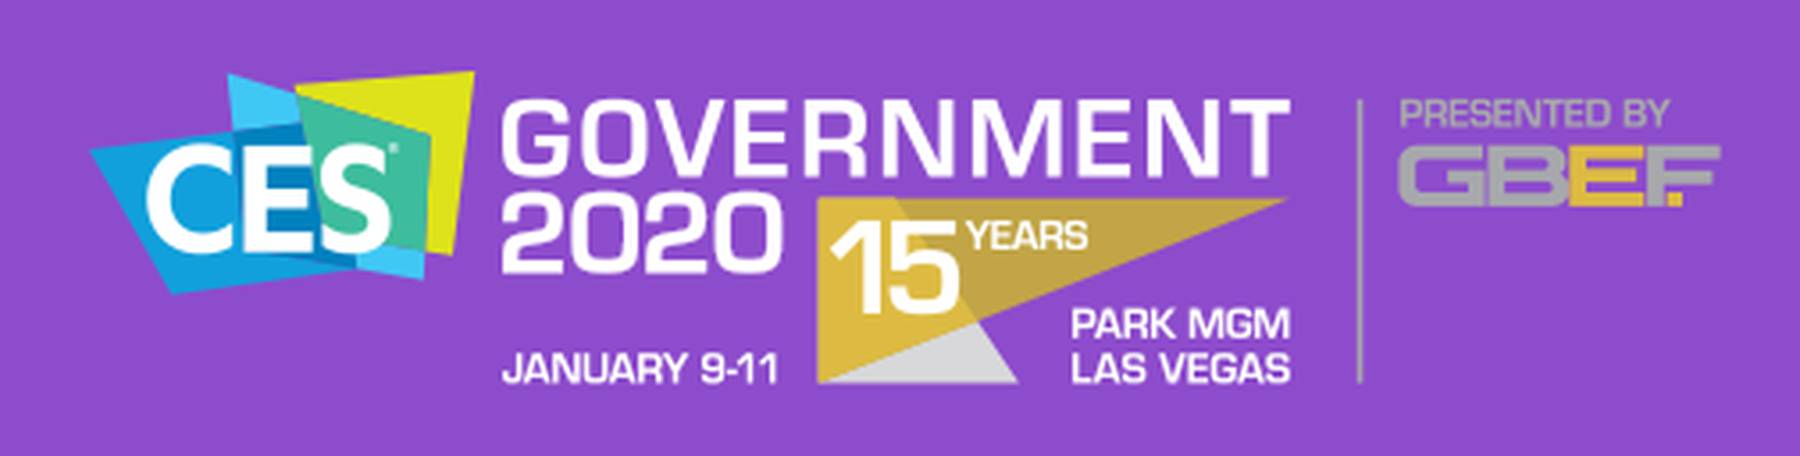 CES Government 2020